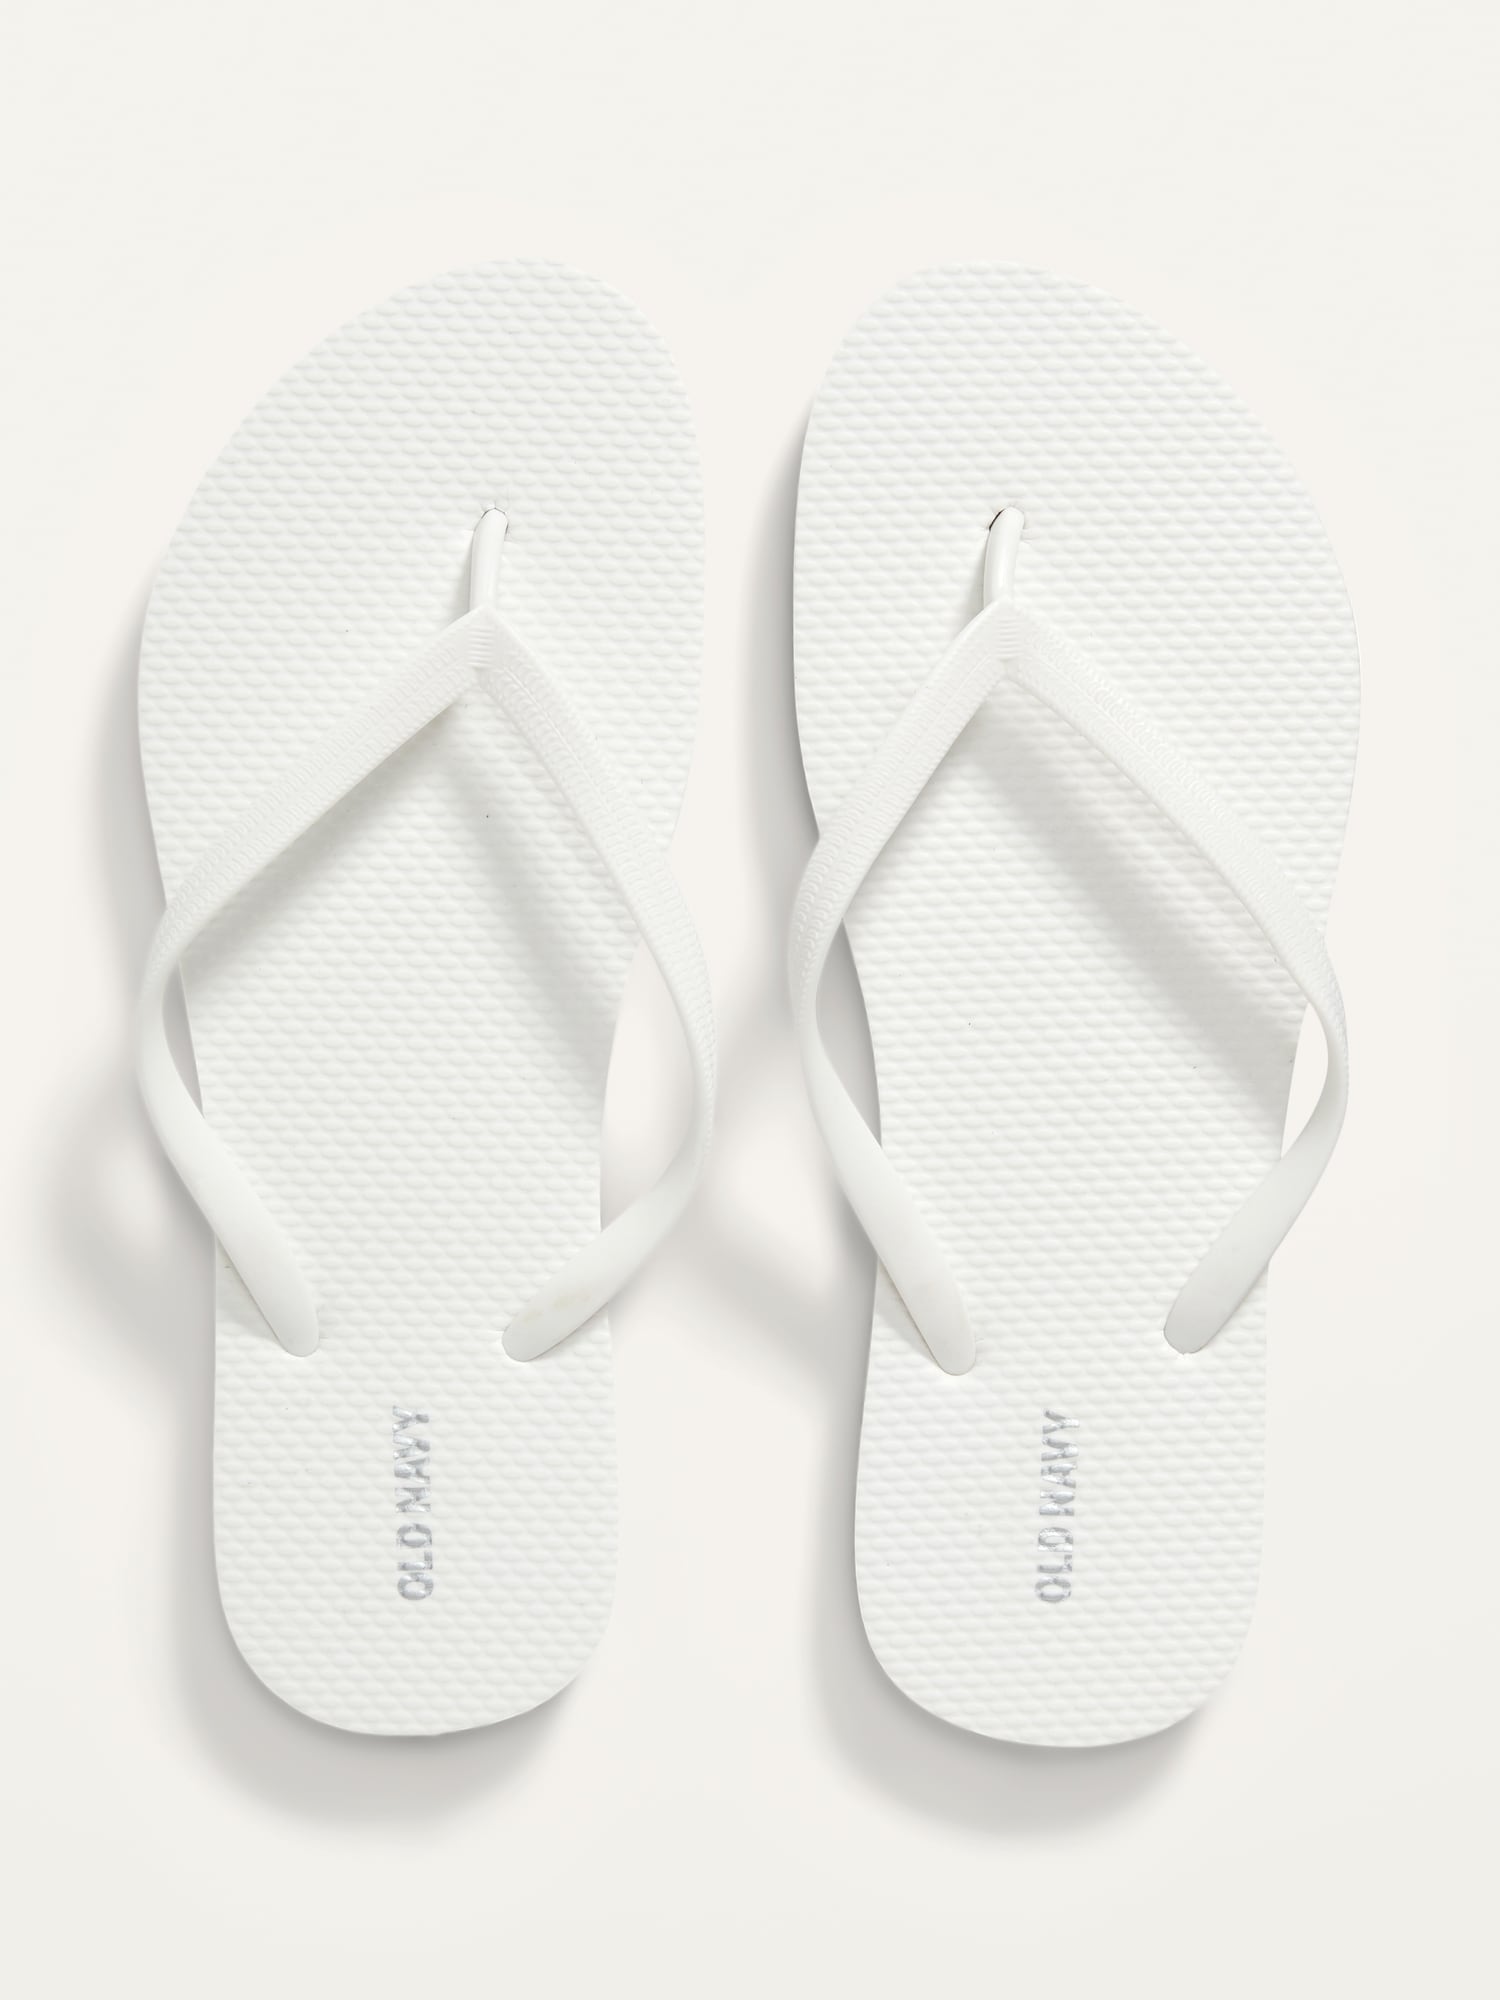 Flip-Flop Sandals for Women (Partially Plant-Based)